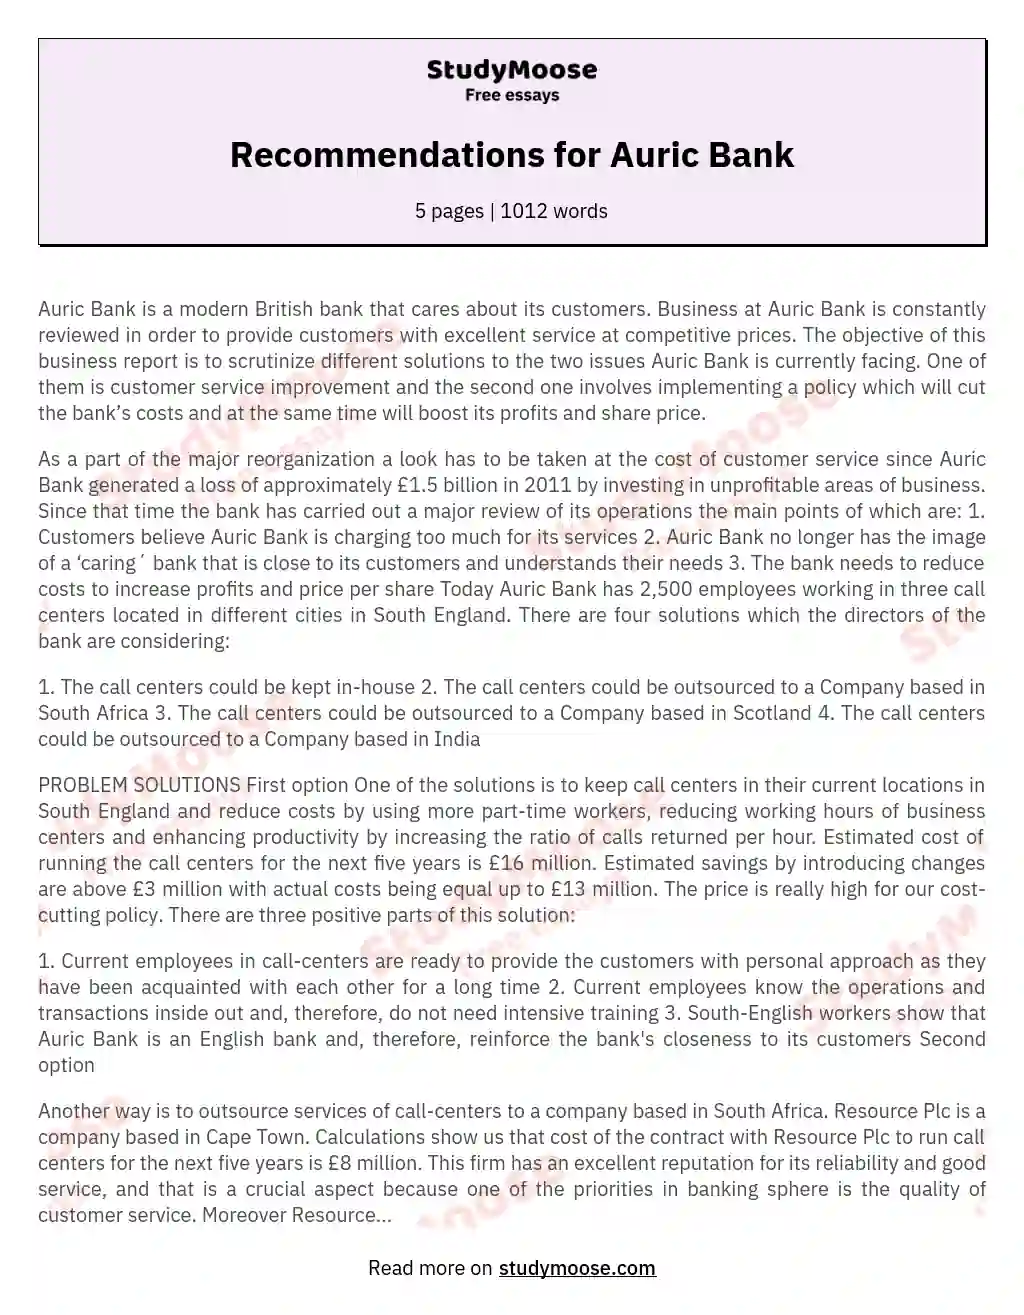 Recommendations for Auric Bank